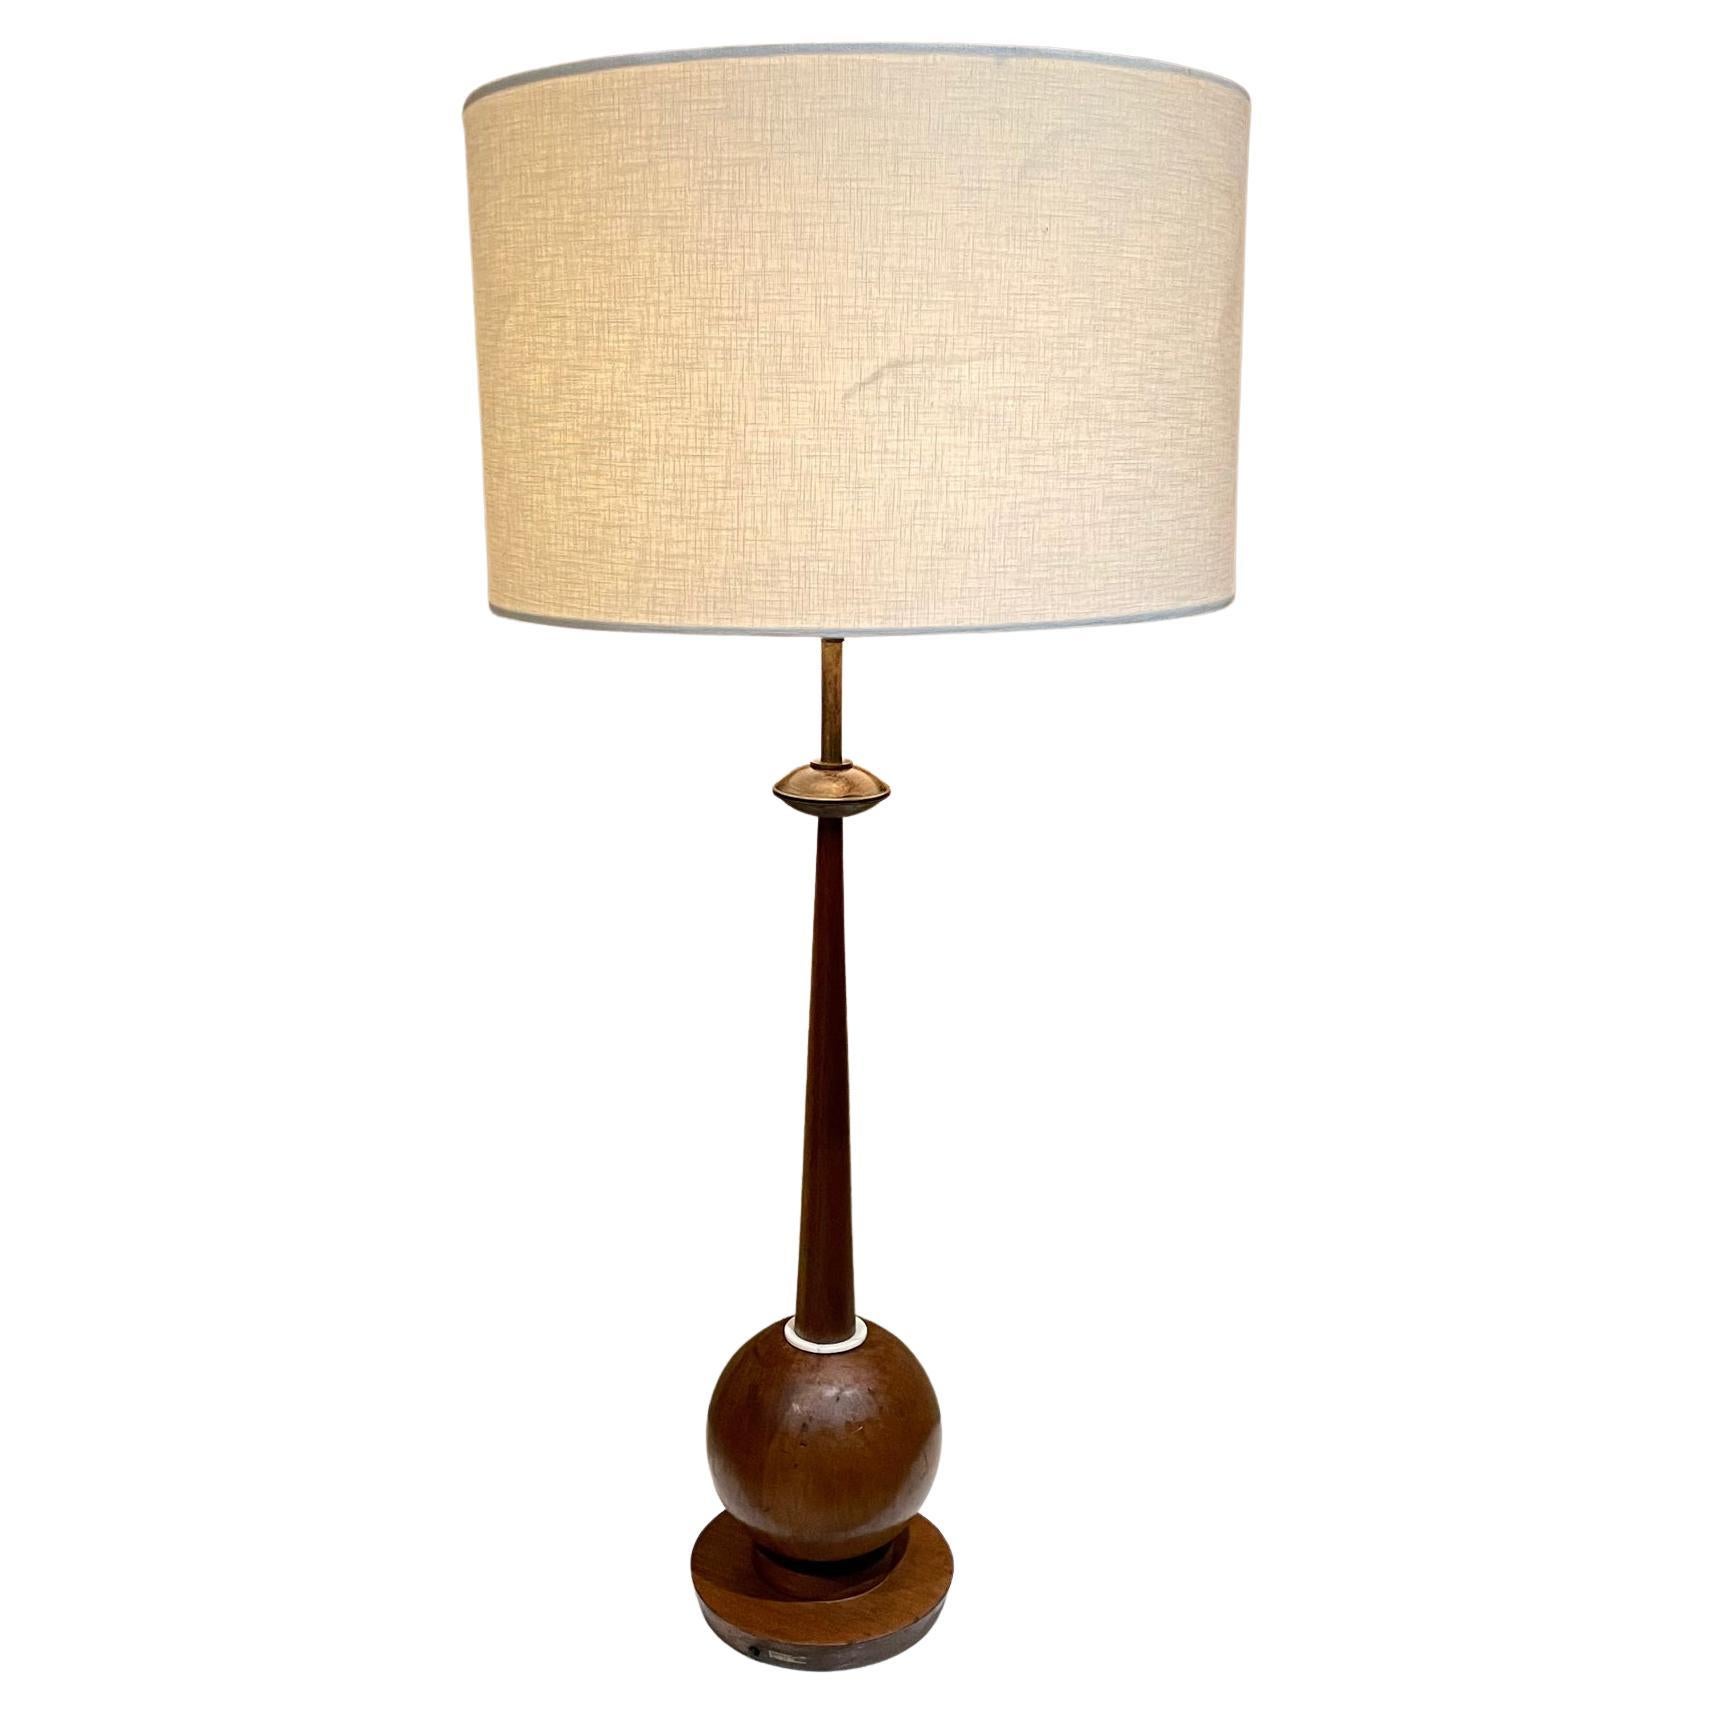 1960s Mahogany Sphere Table Lamp Style of Tony Paul Westwood For Sale